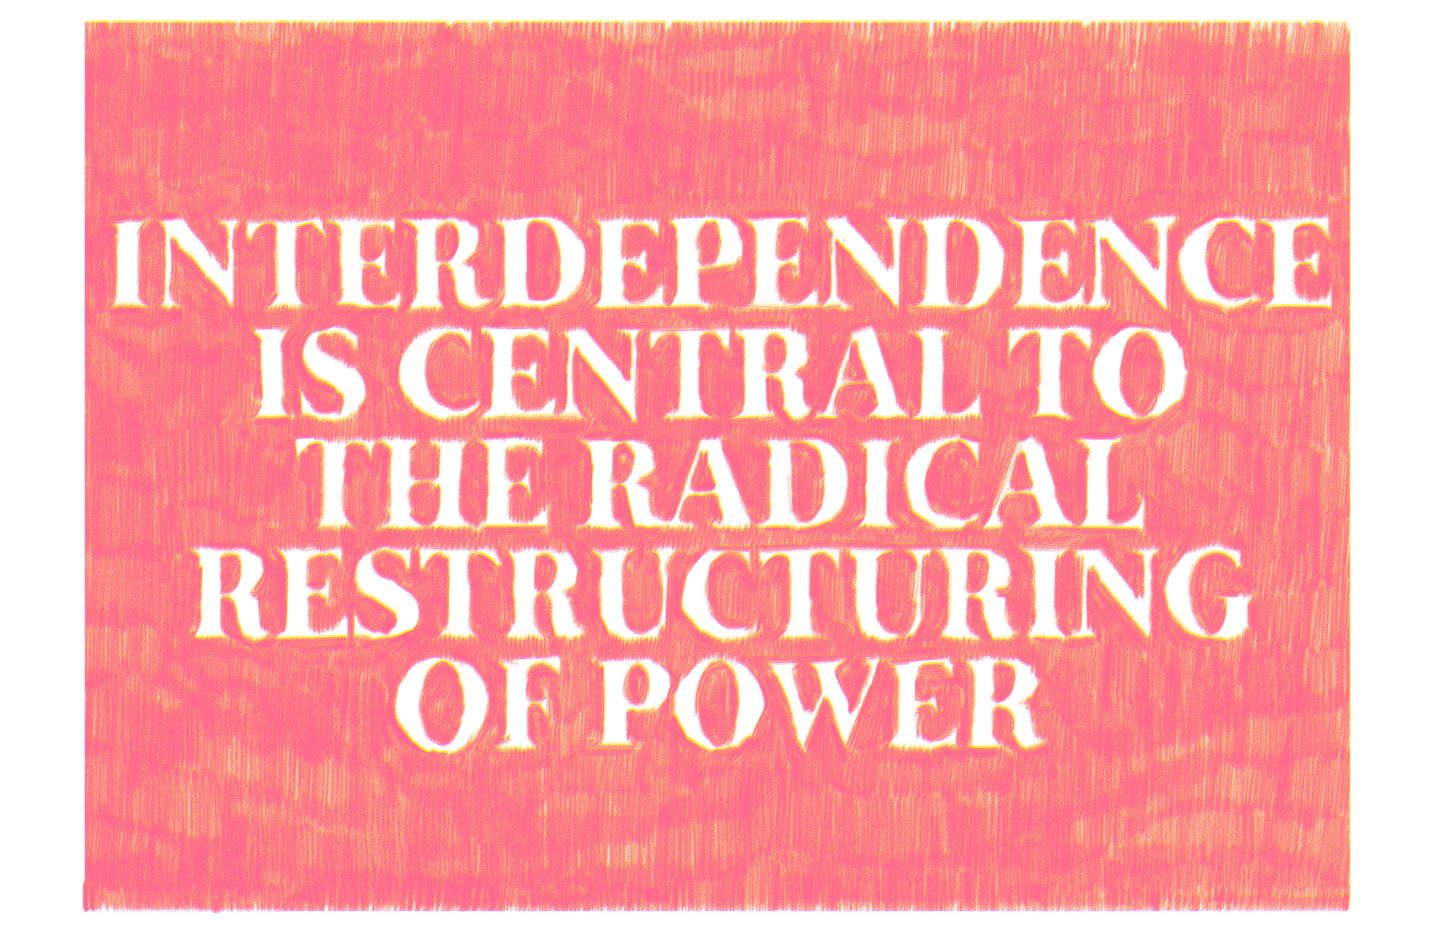 A drawing with a red background and script in large, uppercase, white letters which reads "INTERDEPENDENCE IS CENTRAL TO THE RADICAL RESTRUCTURING OF POWER". The red is made out of small, hand drawn pencil marks. The white letters are made out of the negative space where the red pencil marks have not been applied.